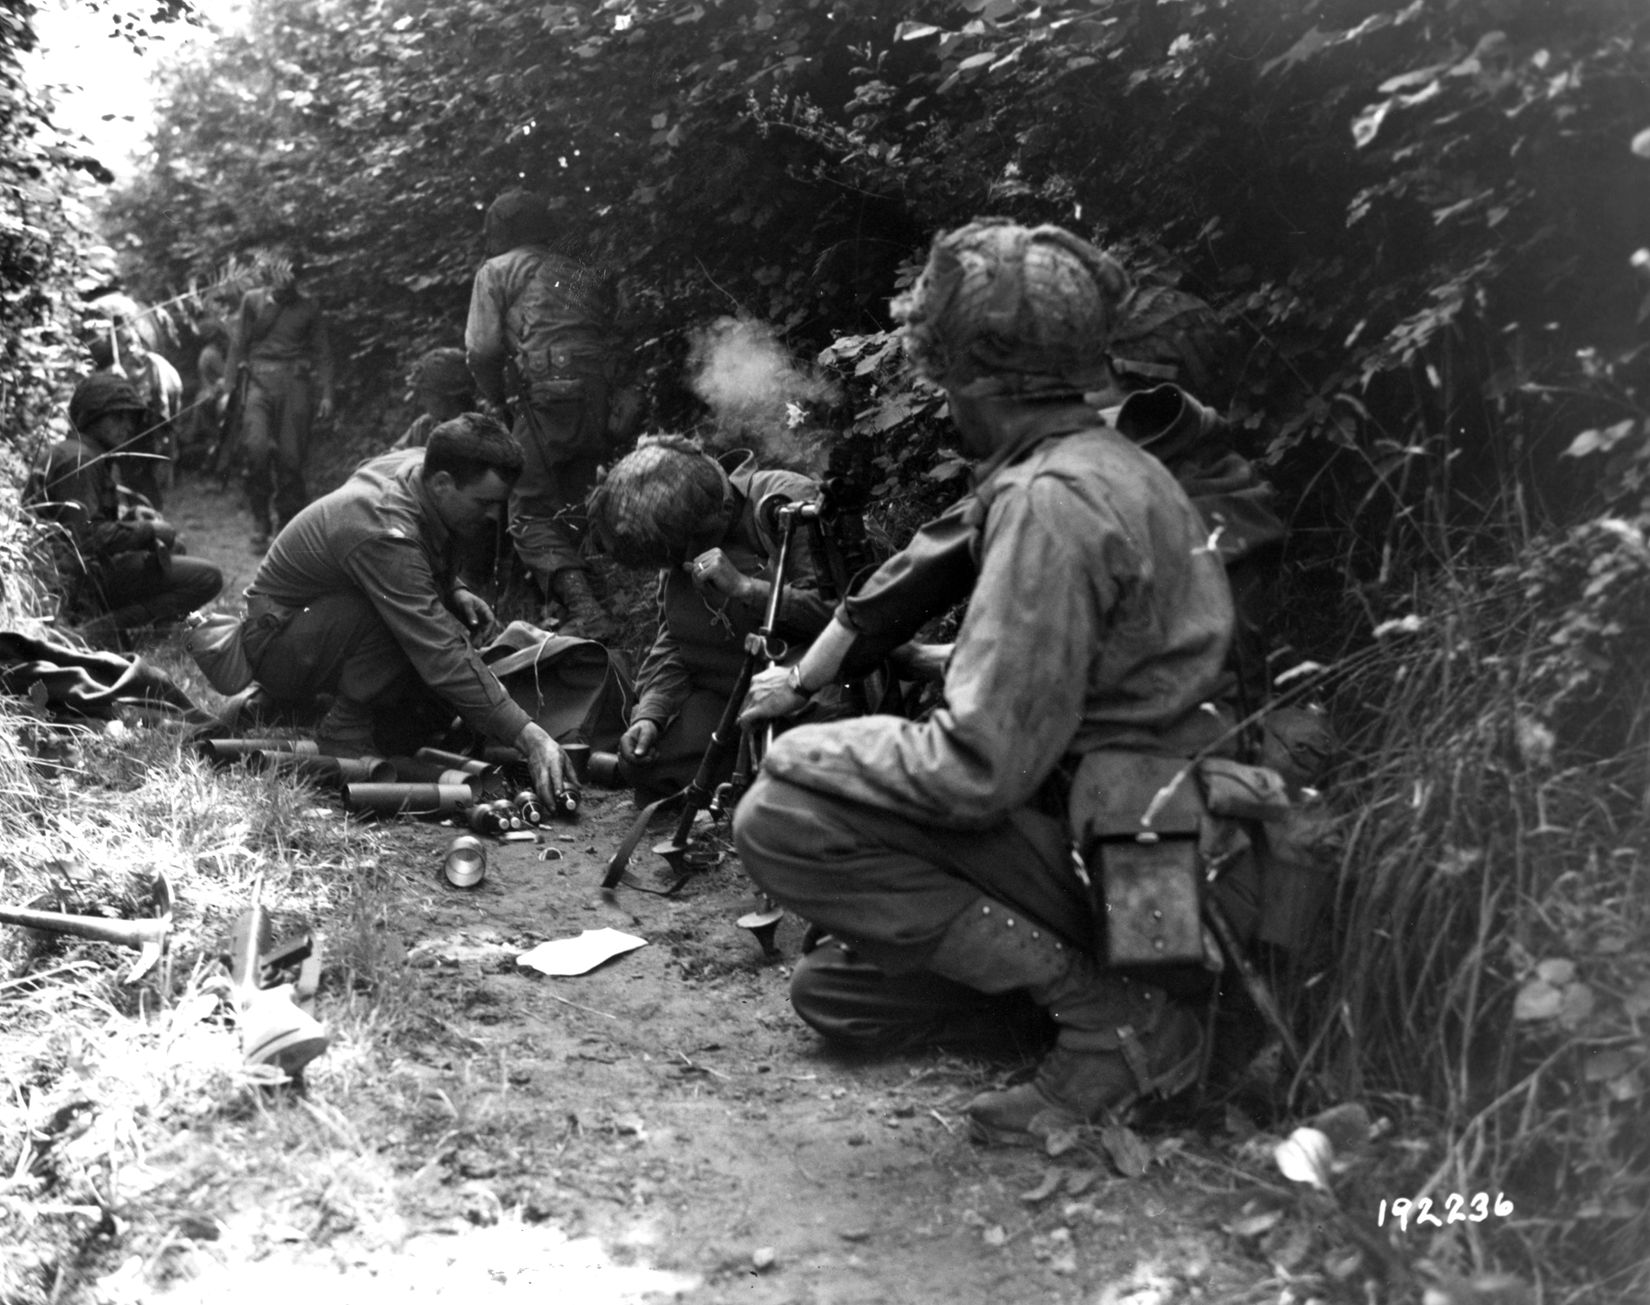 The crew of an American 81mm mortar springs into action during the fighting in Normandy.